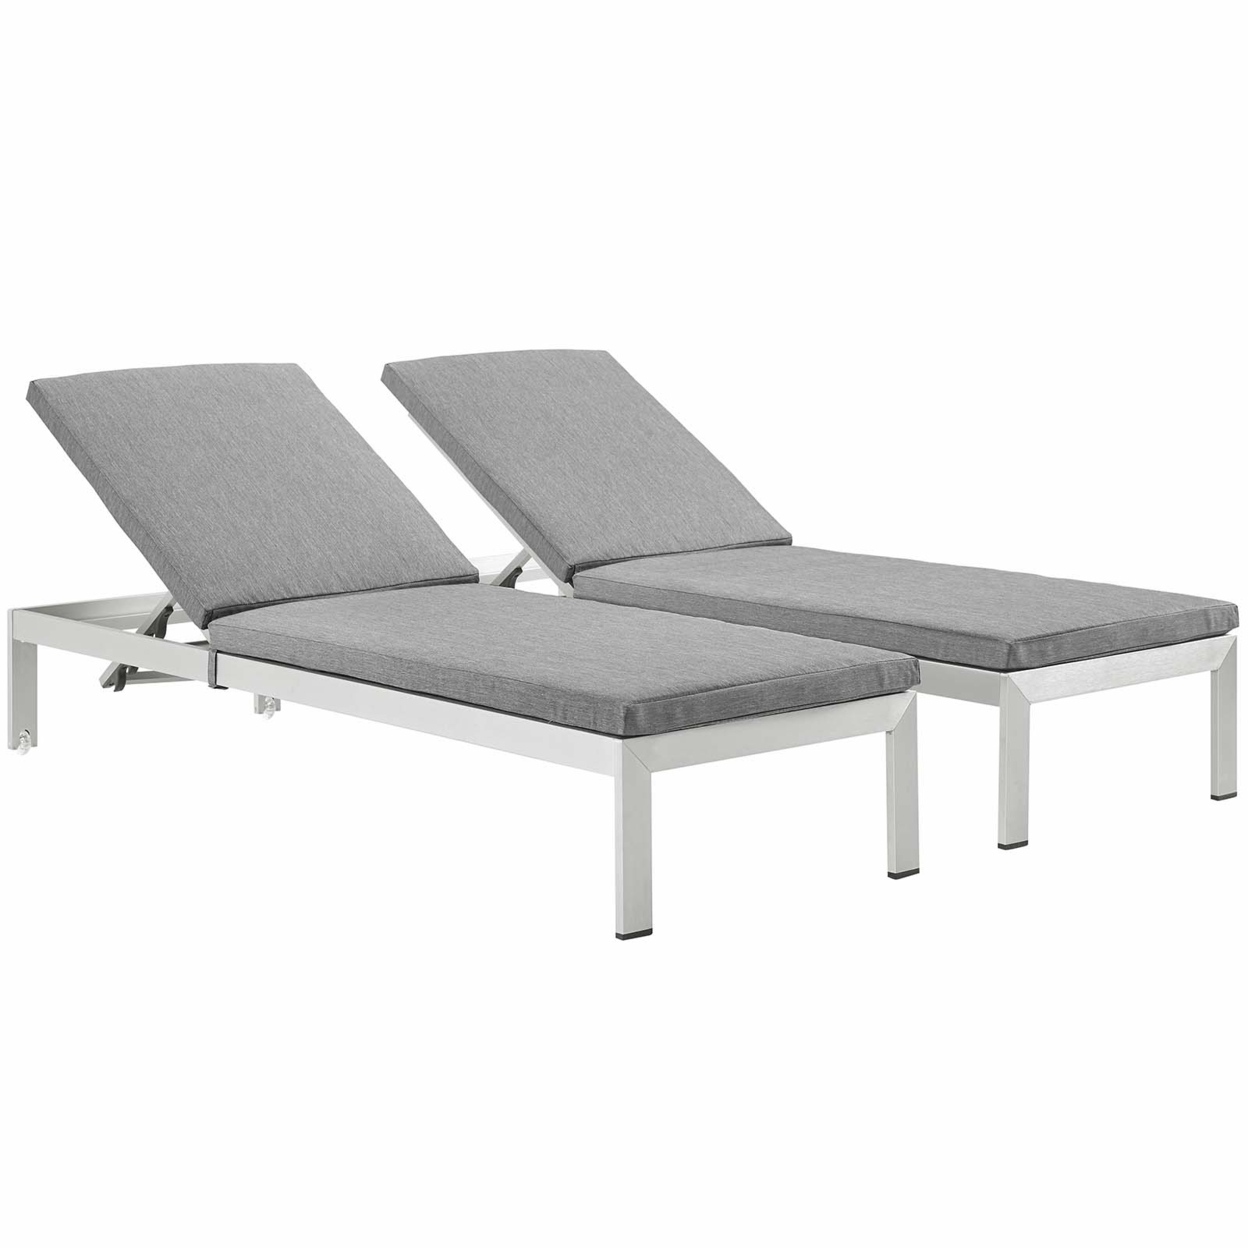 Shore Chaise With Cushions Outdoor Patio Aluminum Set Of 2, Silver Gray